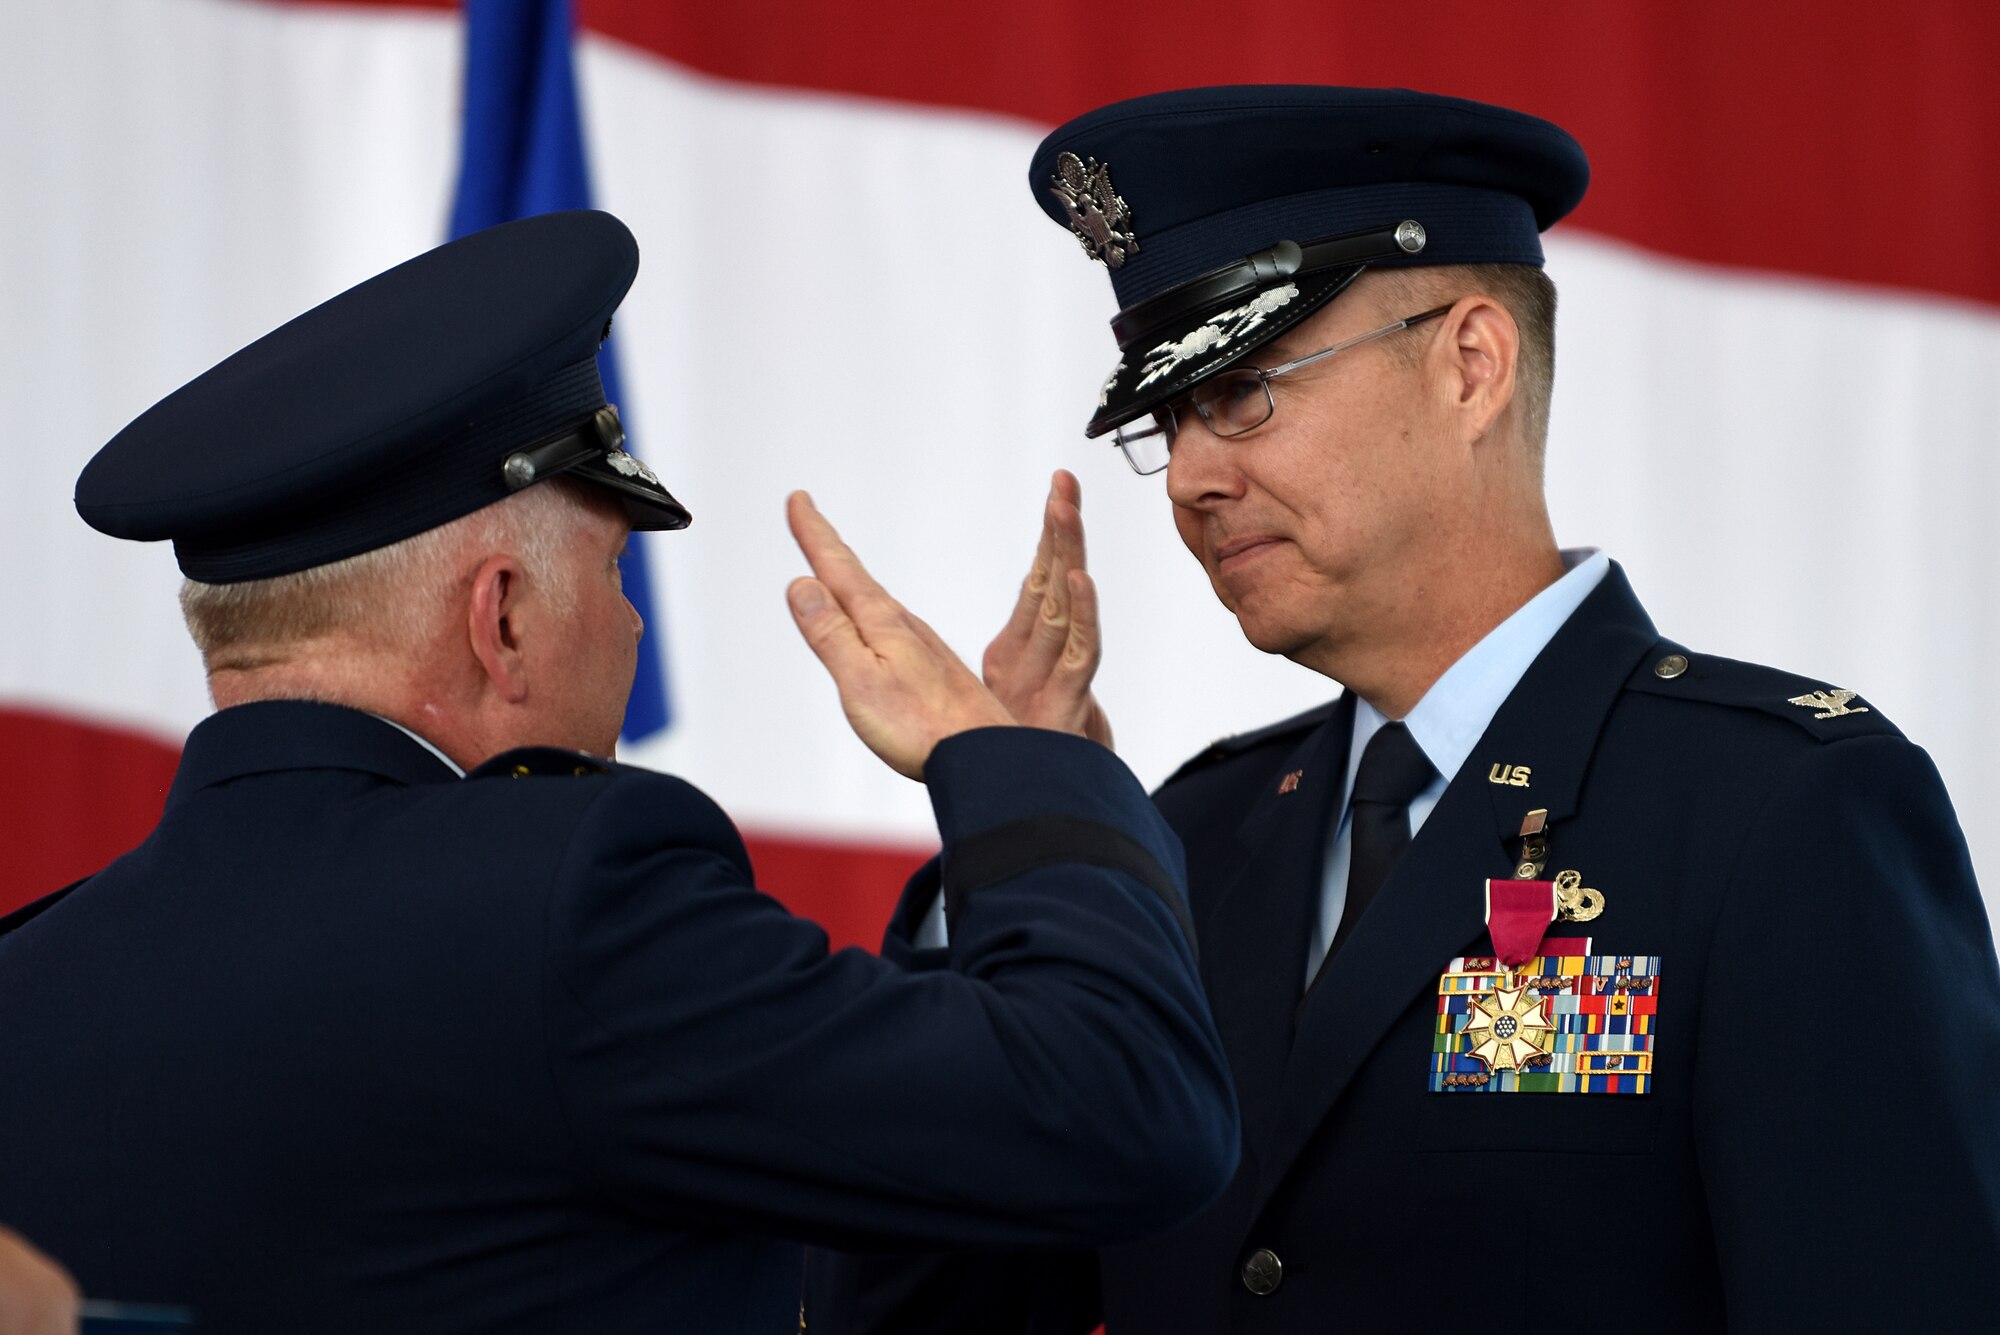 Col. Richard Gibbs, former 377th Air Base Wing commander, is awarded a Legion of Merit by Maj. Gen. Ferdinand B. Stoss III, 20th Air Force commander, during the 377th ABW Change of Command Ceremony at Kirtland Air Force Base, N.M., June 21, 2019. Gibbs, selected for brigadier general, will head to Air Mobility Command and Scott AFB, Ill., where he will become the A4 Director of Logistics, Engineering, and Force Protection. (U.S. Air Force photo by Senior Airman Eli Chevalier)